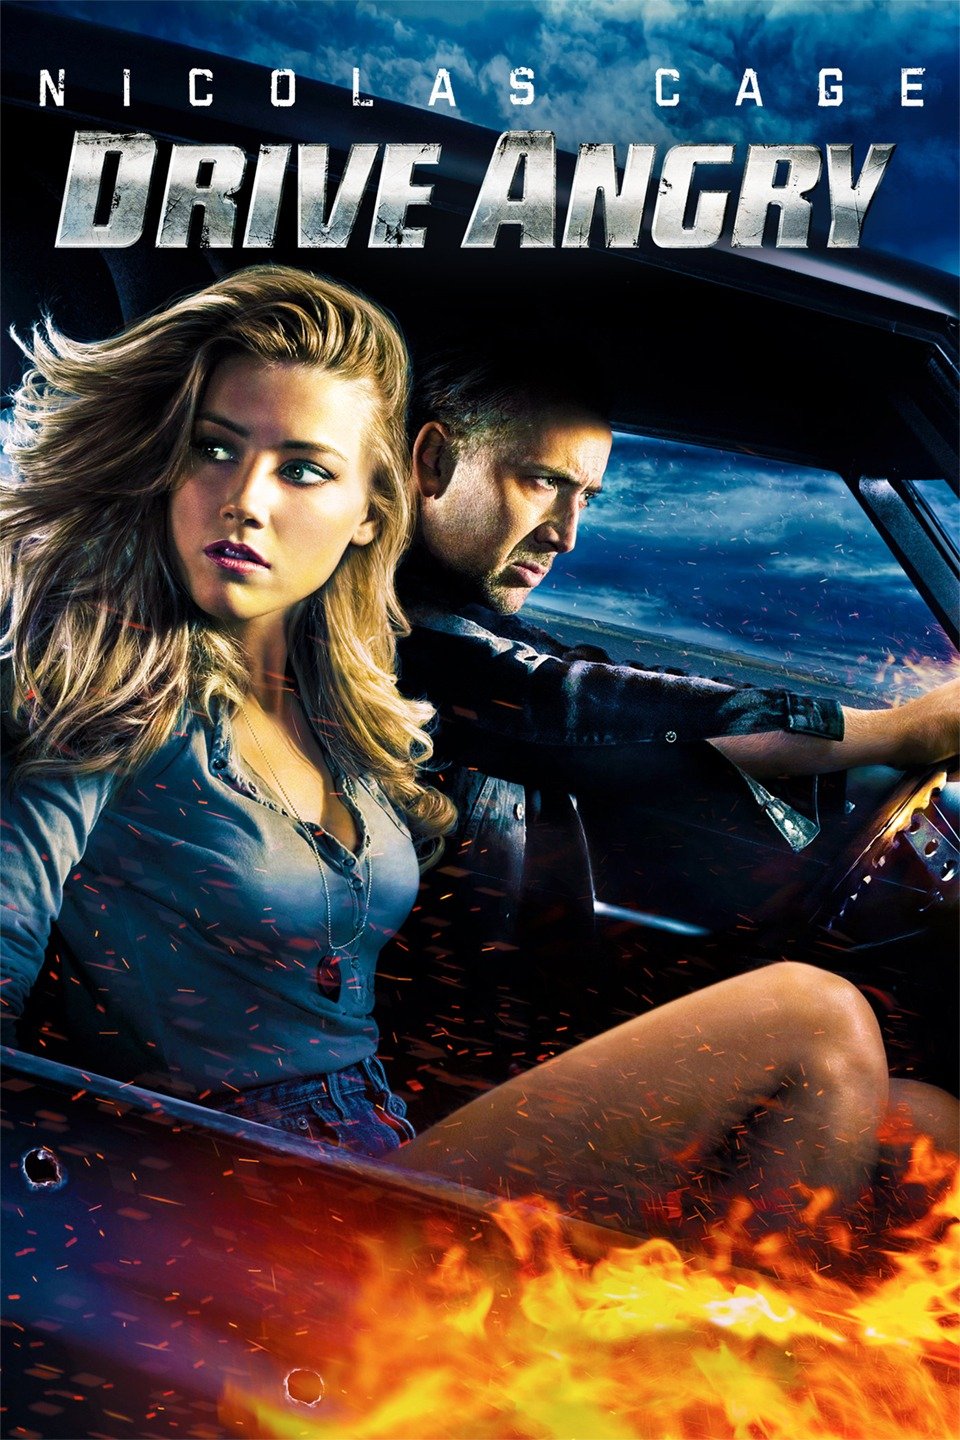 Drive Angry Wallpapers